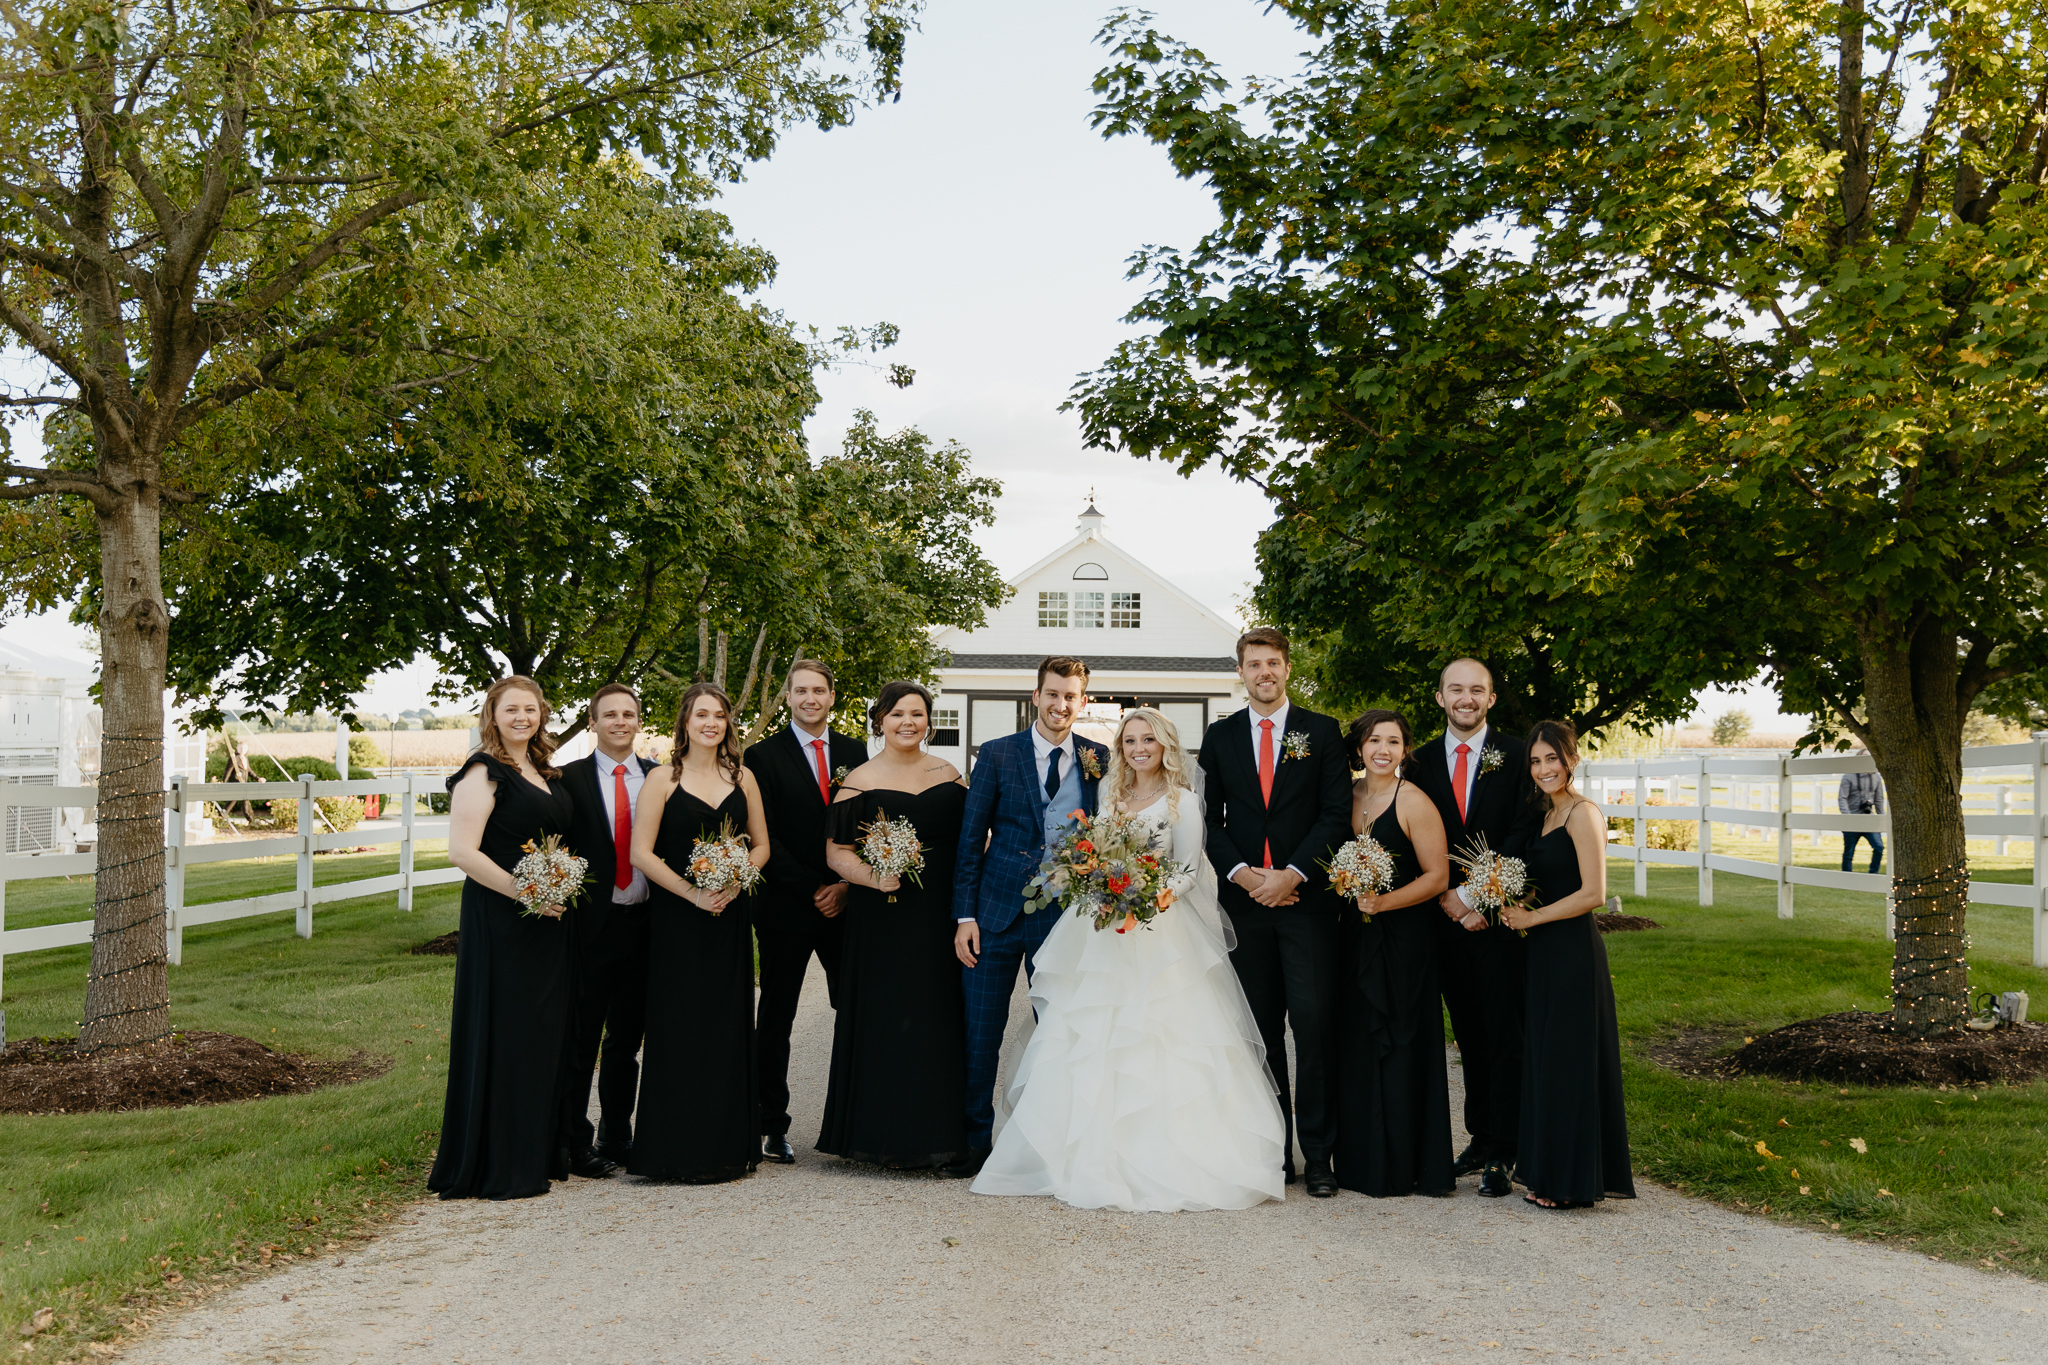 Wedding party of bridesmaids and groomsmen stand in a line and smile in front of a white horse stable and trees